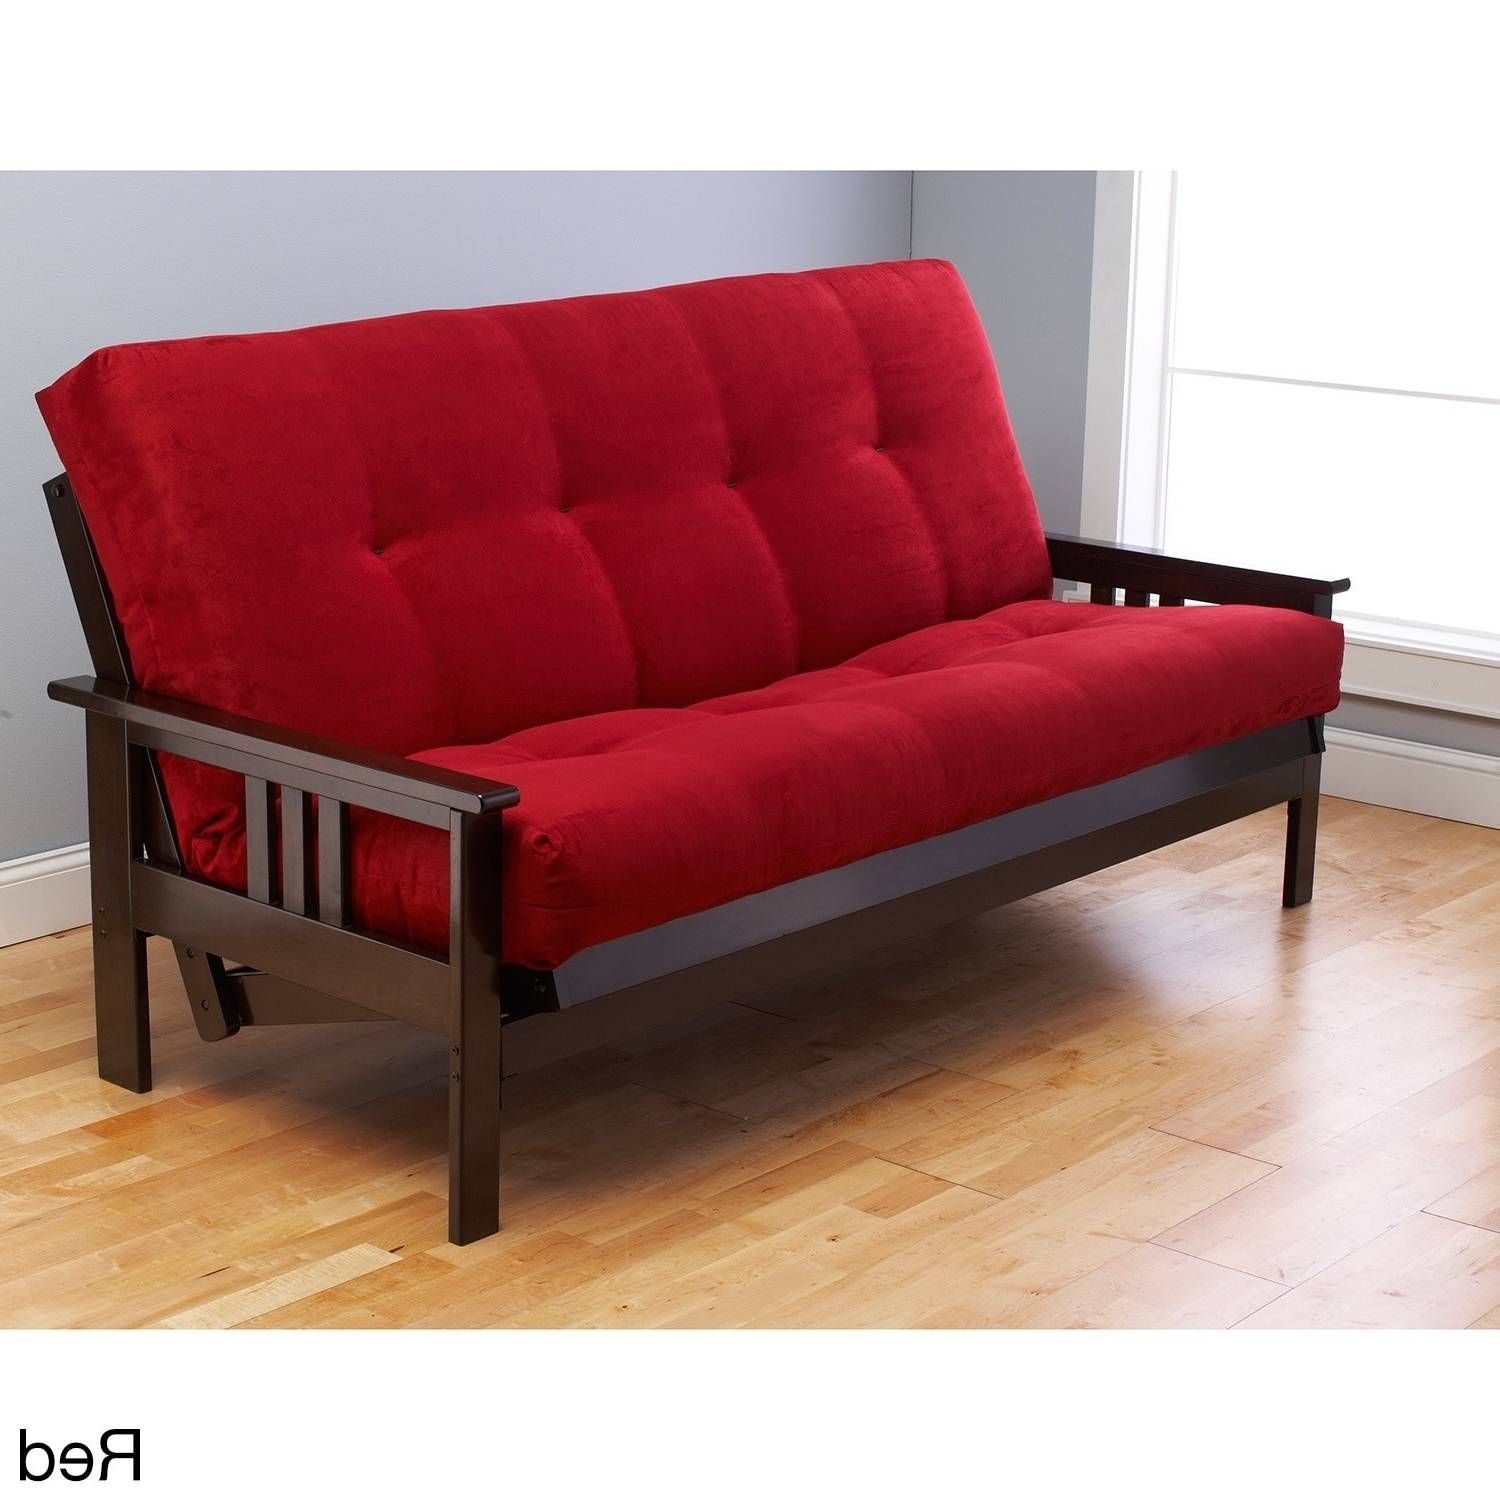 Furniture: Comfy Design Of Sears Sofa Bed For Lovely Home Regarding Cool Sofa Ideas (View 7 of 30)